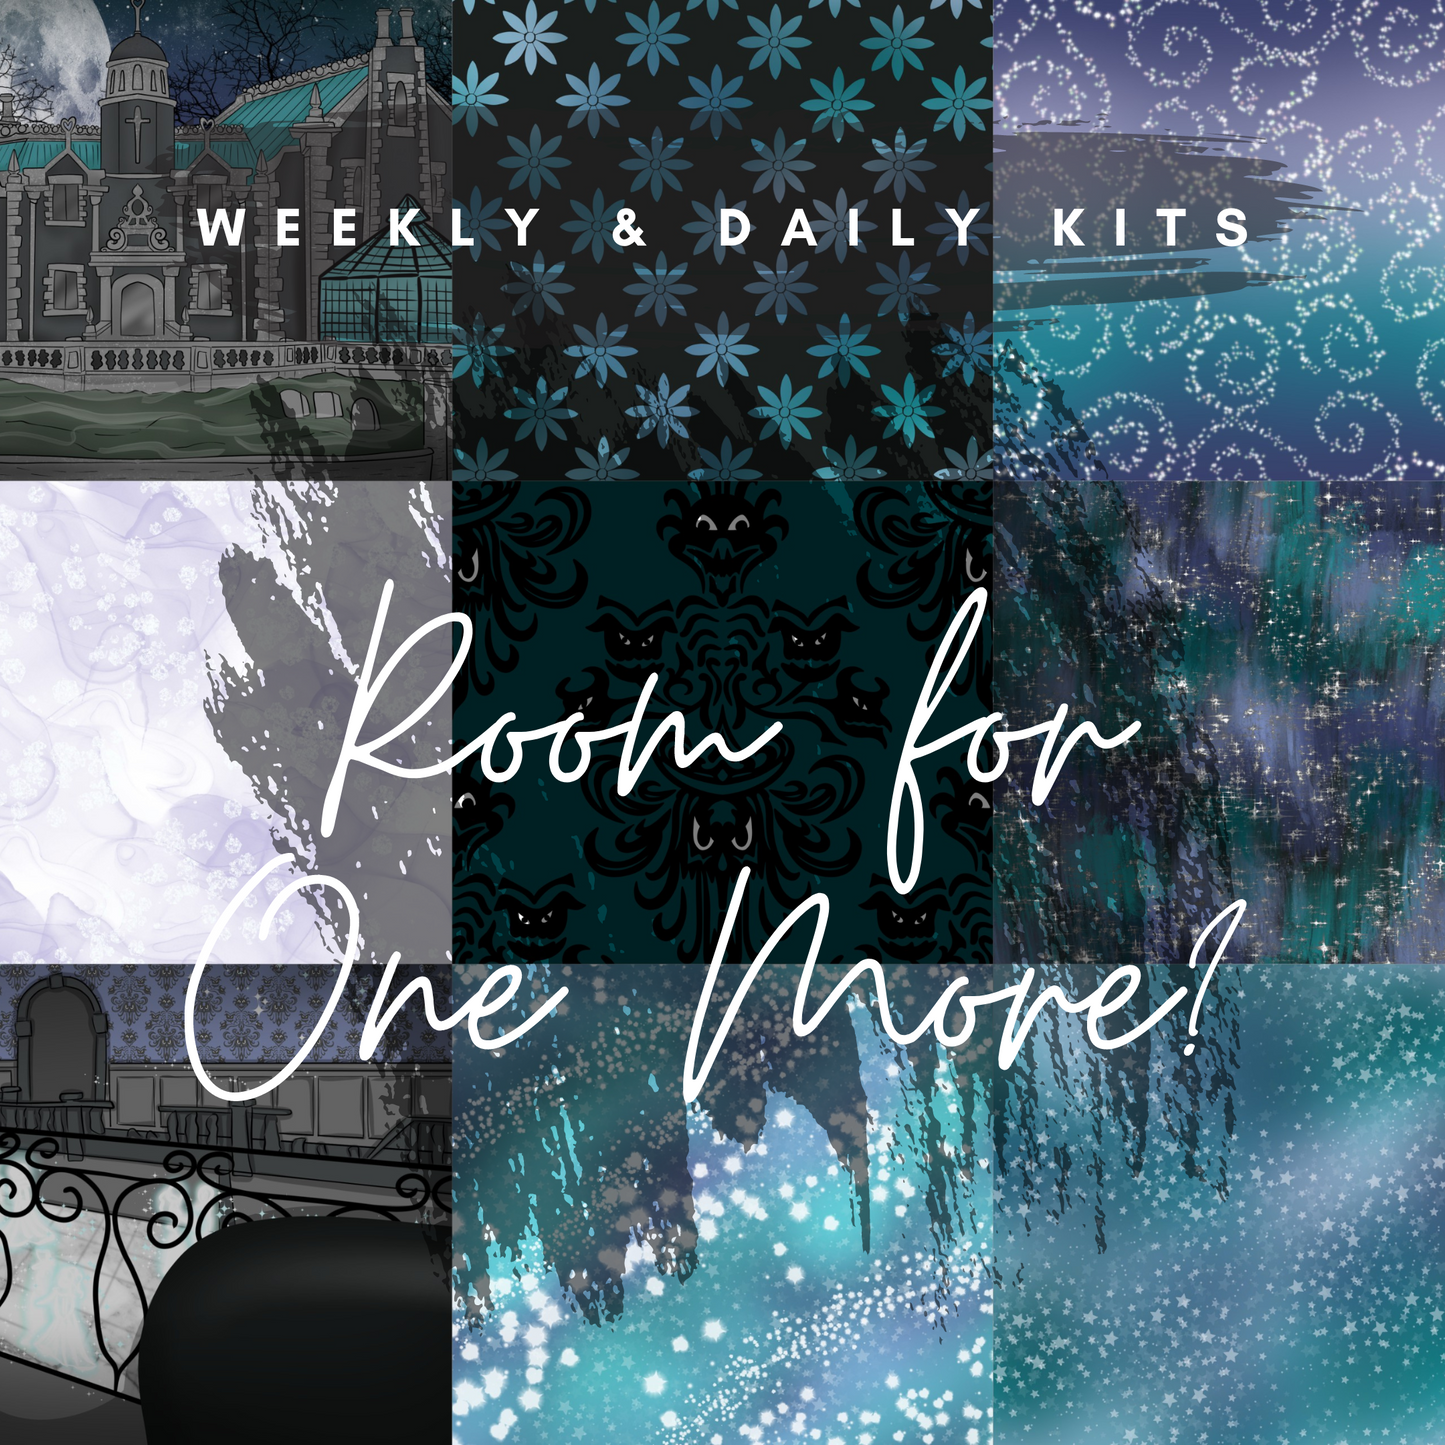 Daily & Weekly Kit / Room for One More? Dark